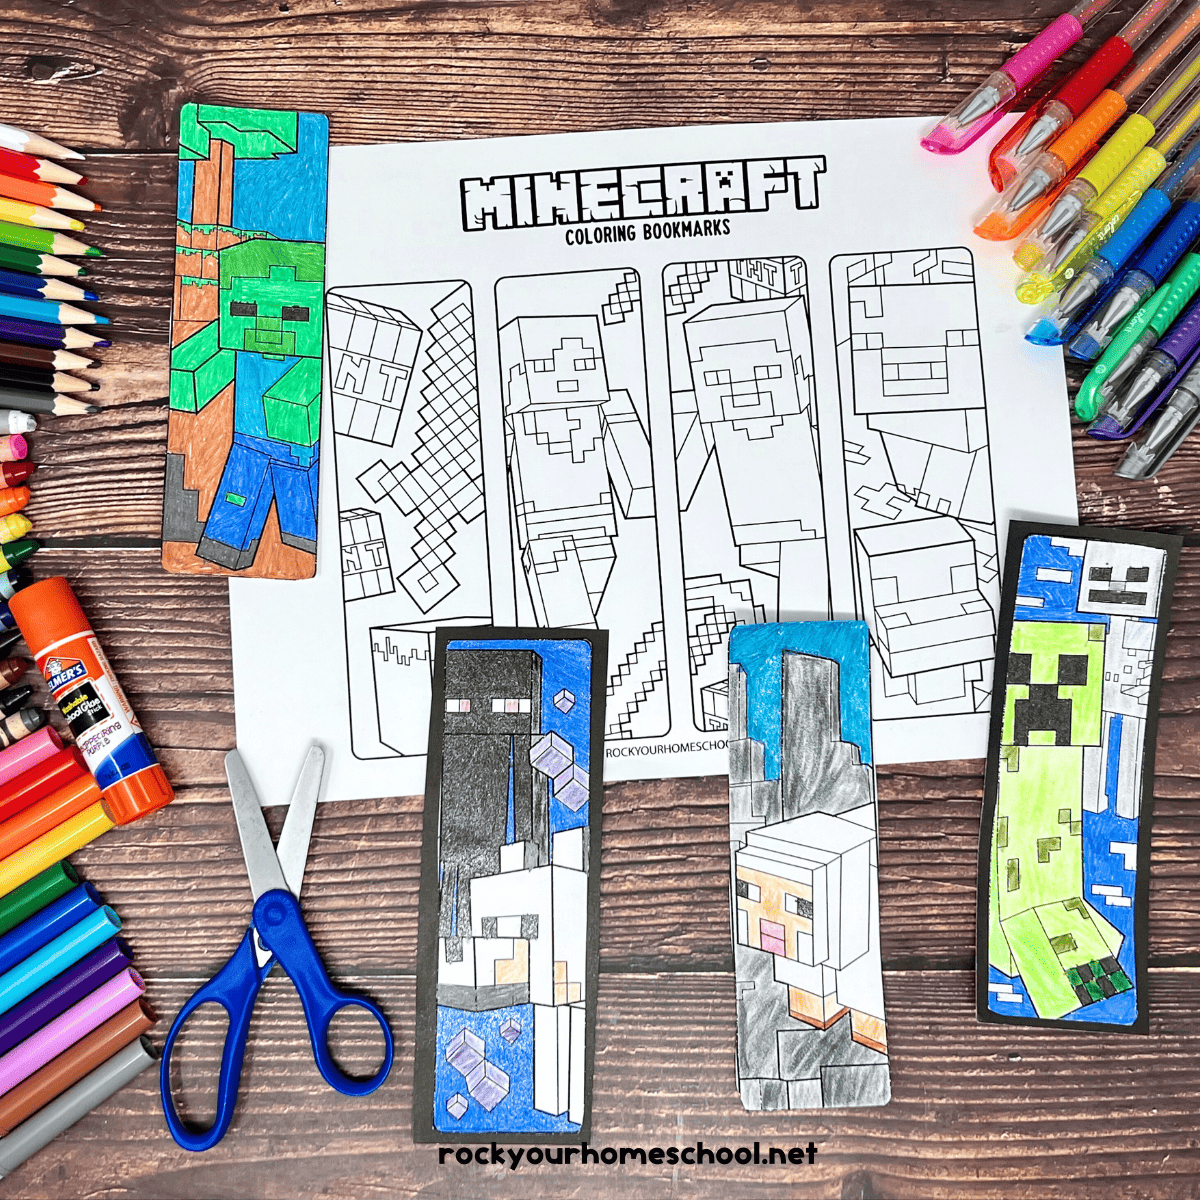 Examples of Minecraft bookmarks to color with scissors, glue stick, markers, crayons, color pencils, and glitter gel pens.